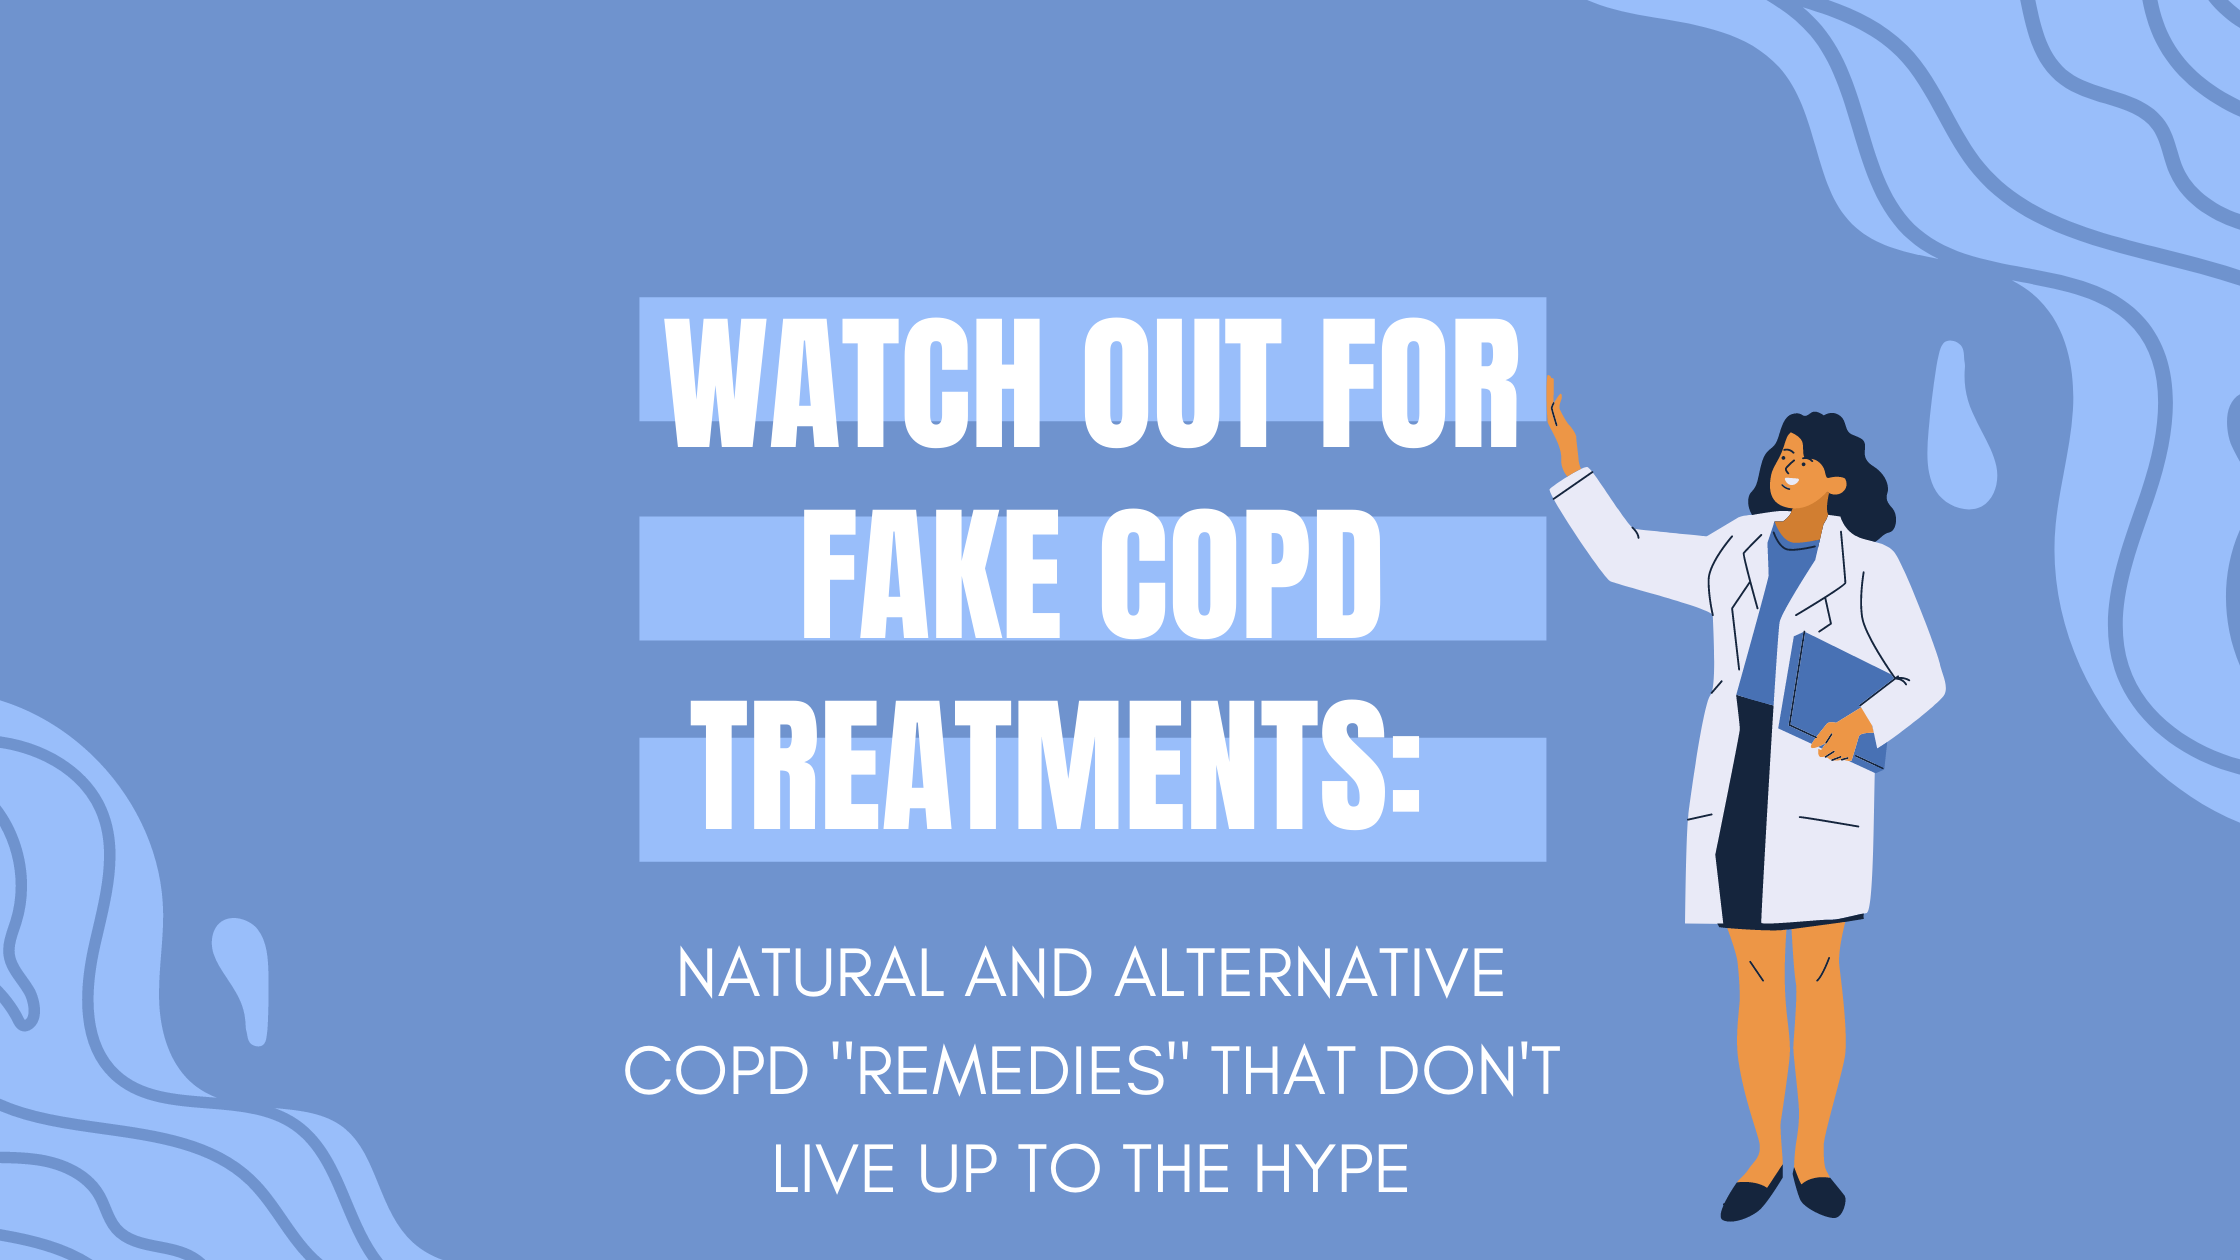 Watch Out for Fake COPD Treatments 9 Natural and Alternative COPD Remedies That Dont Live Up to the Hype